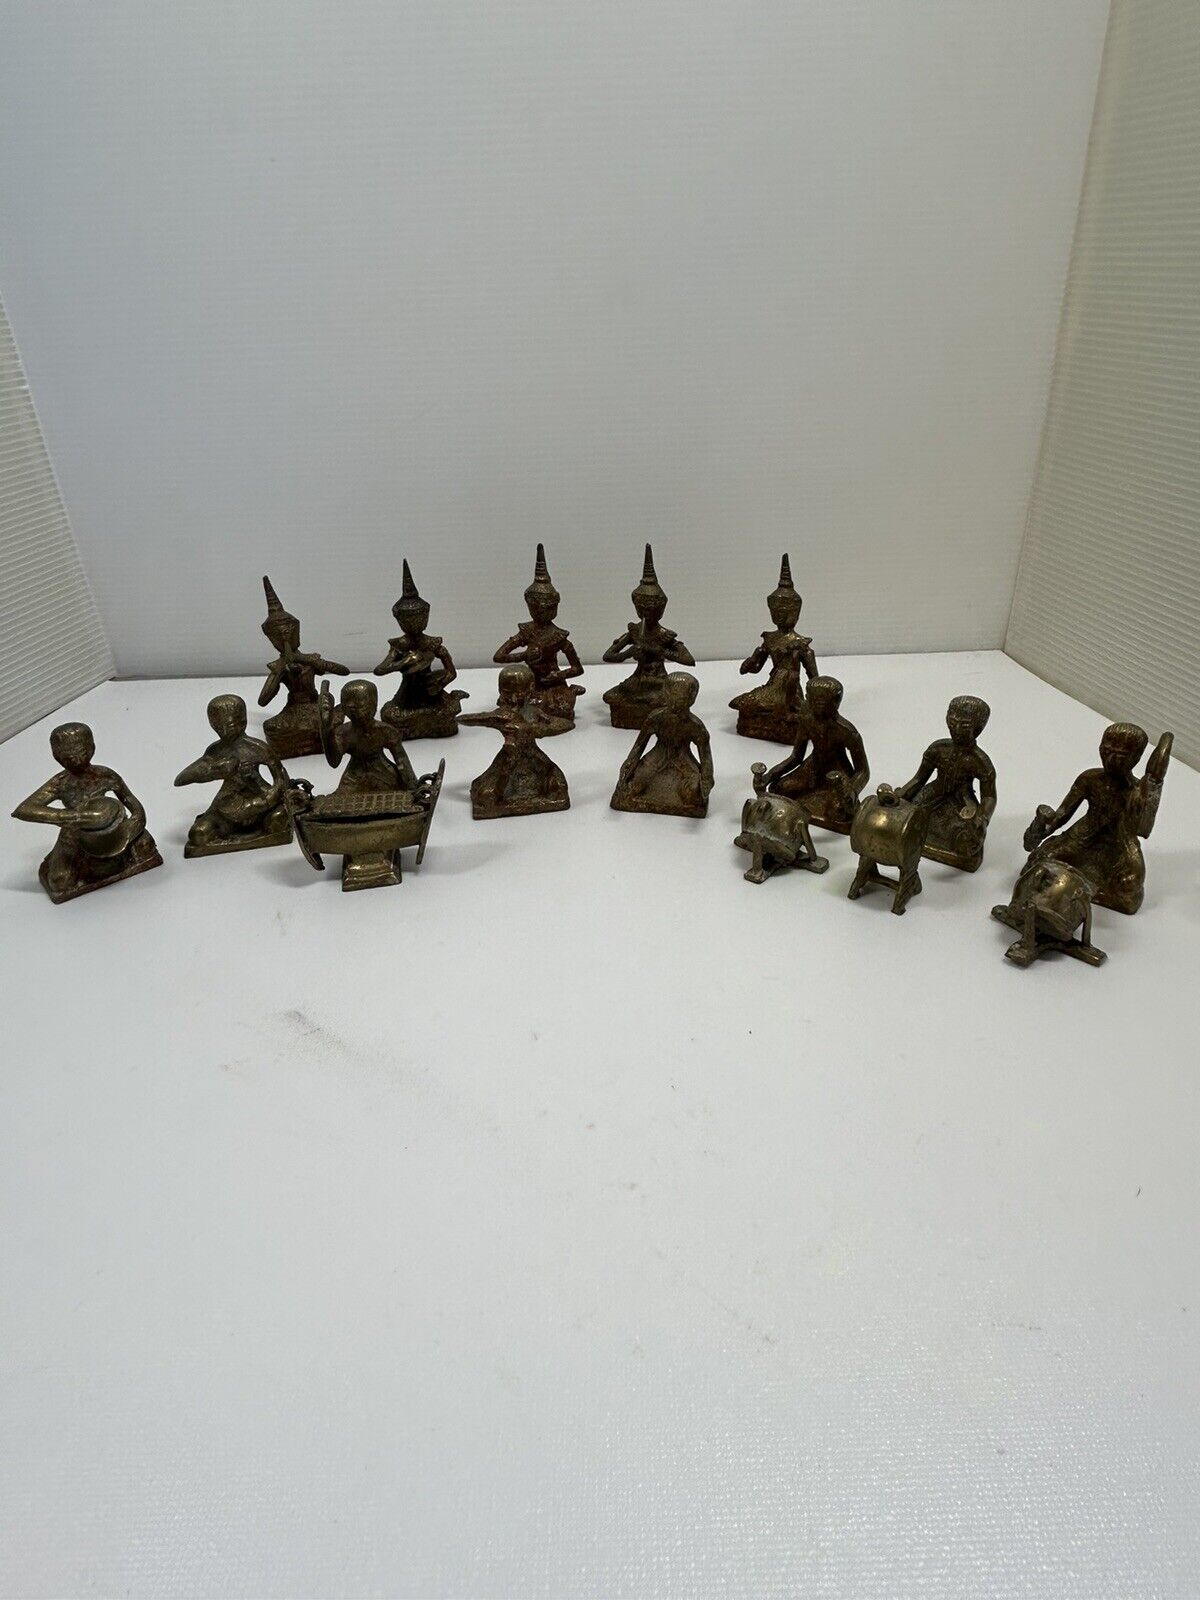 RARE Vintage 17 Piece ASIAN BRASS FIGURINES Musical Band Group w/Base Thailand